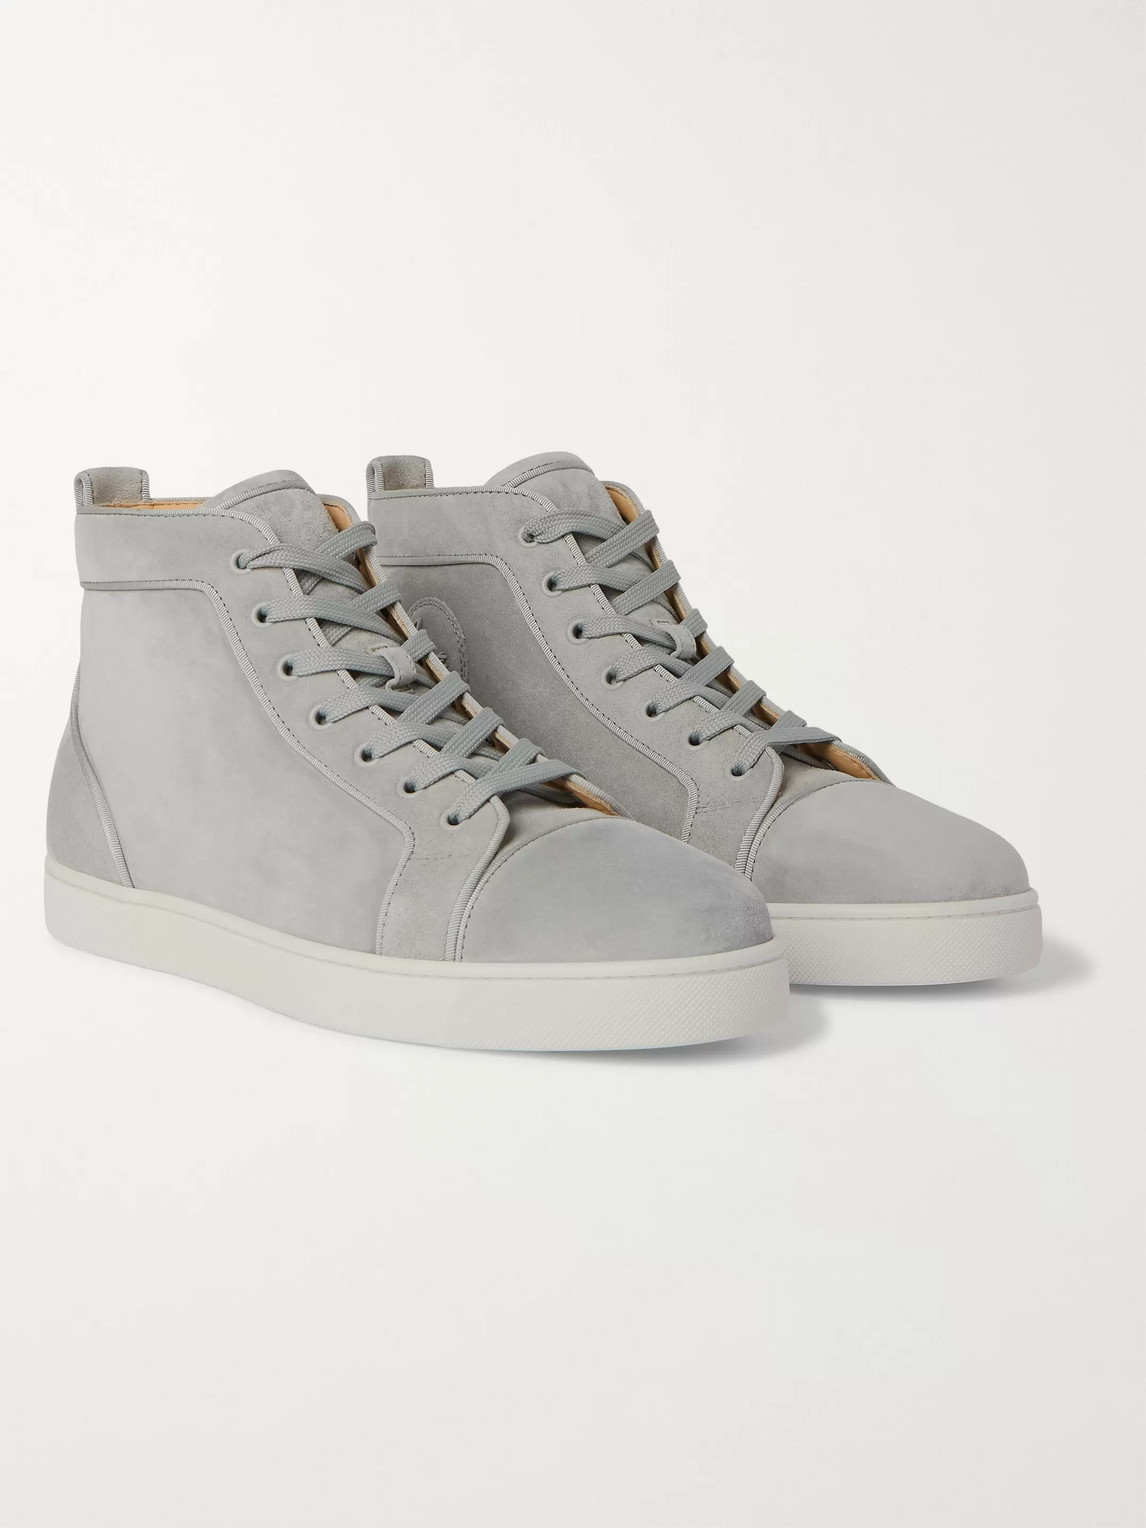 Christian Louboutin Louis Suede High-top Sneakers In Gray